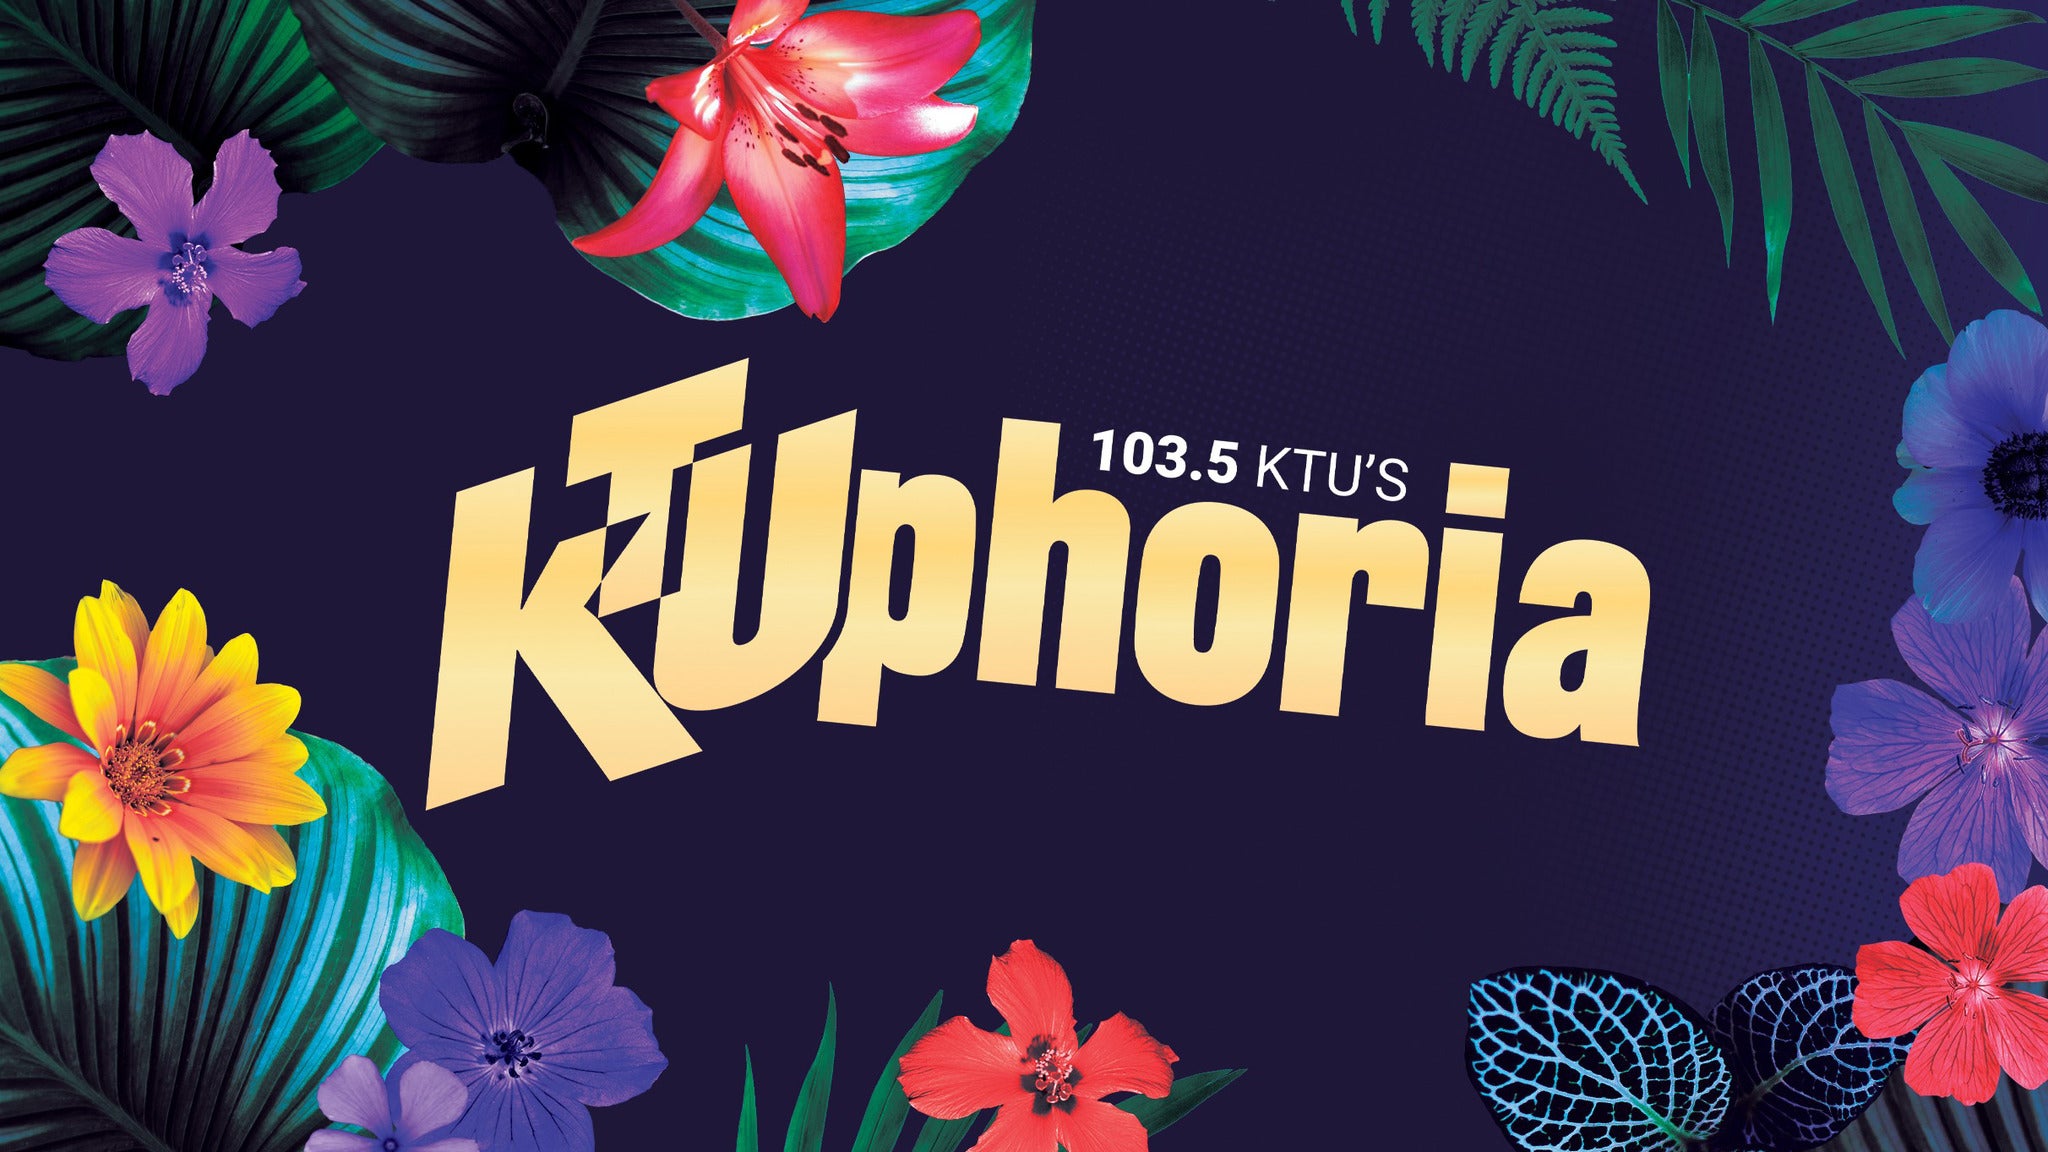 103.5 KTUphoria featuring Kylie Minogue & more in Wantagh promo photo for Artist presale offer code